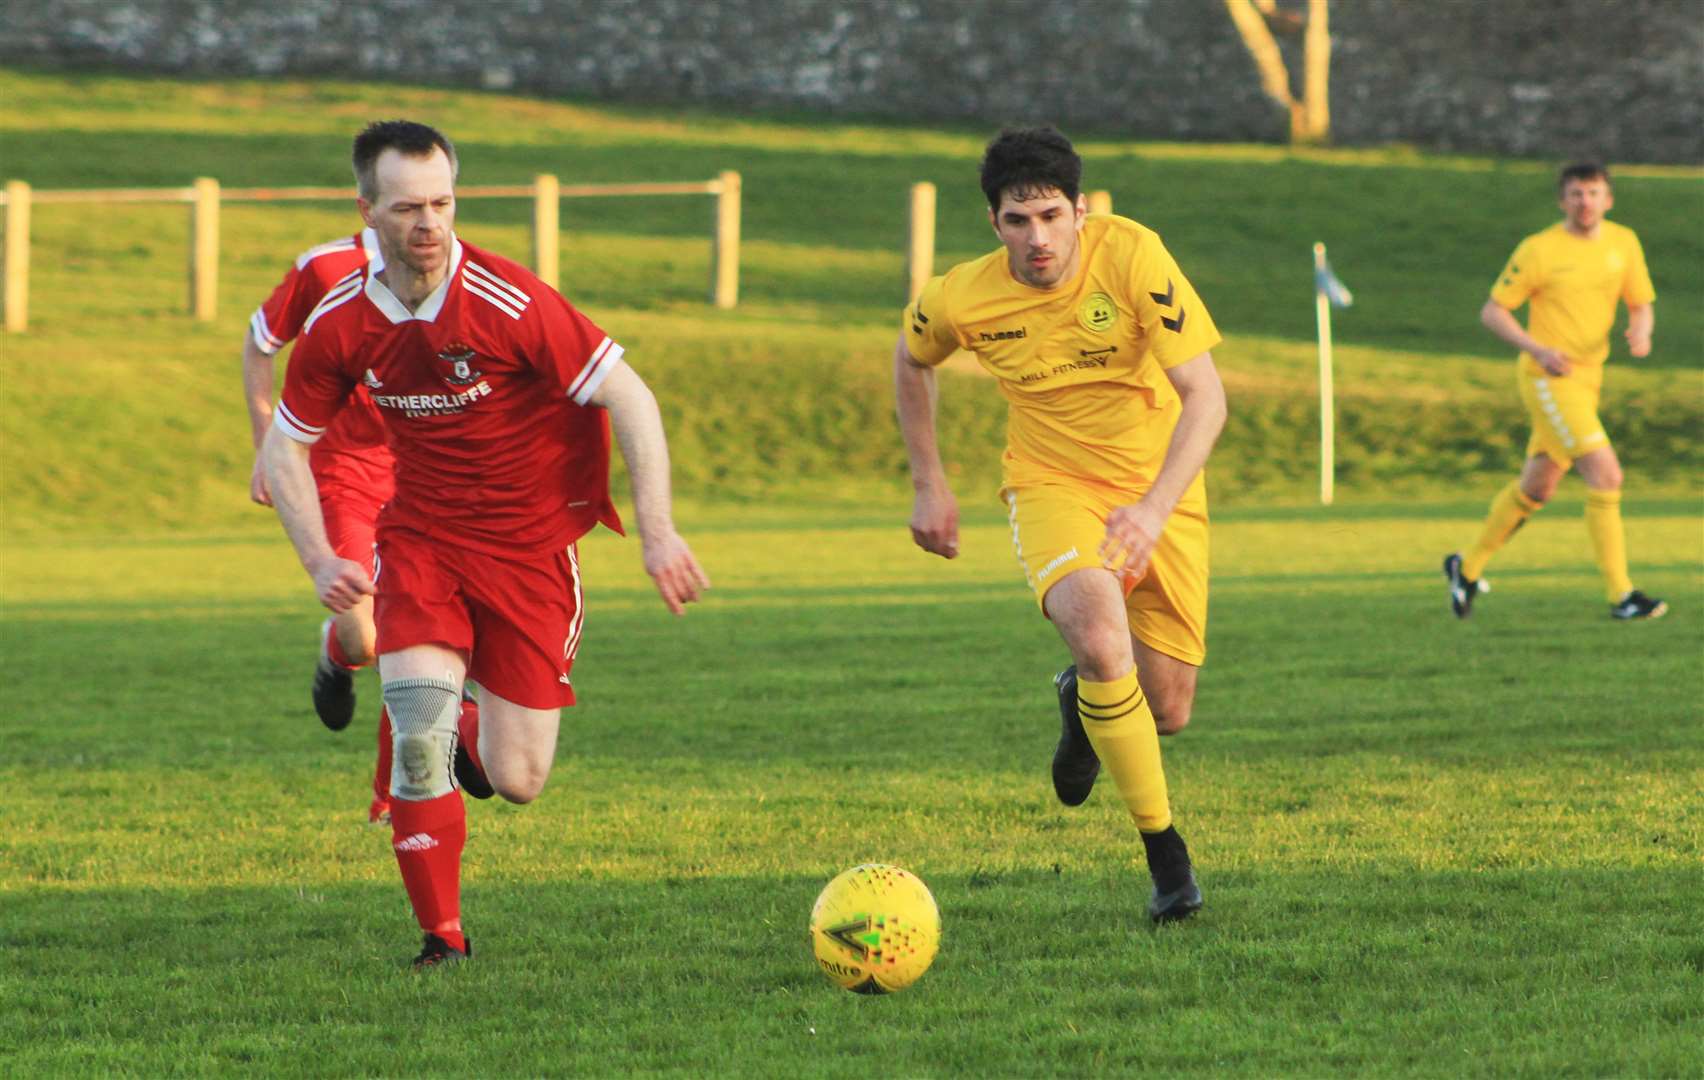 Sean Stewart of Wick Groats and Hasheem Bremner of Staxigoe United chase the ball during Tuesday night's Division One game at the Upper Bignold Park.